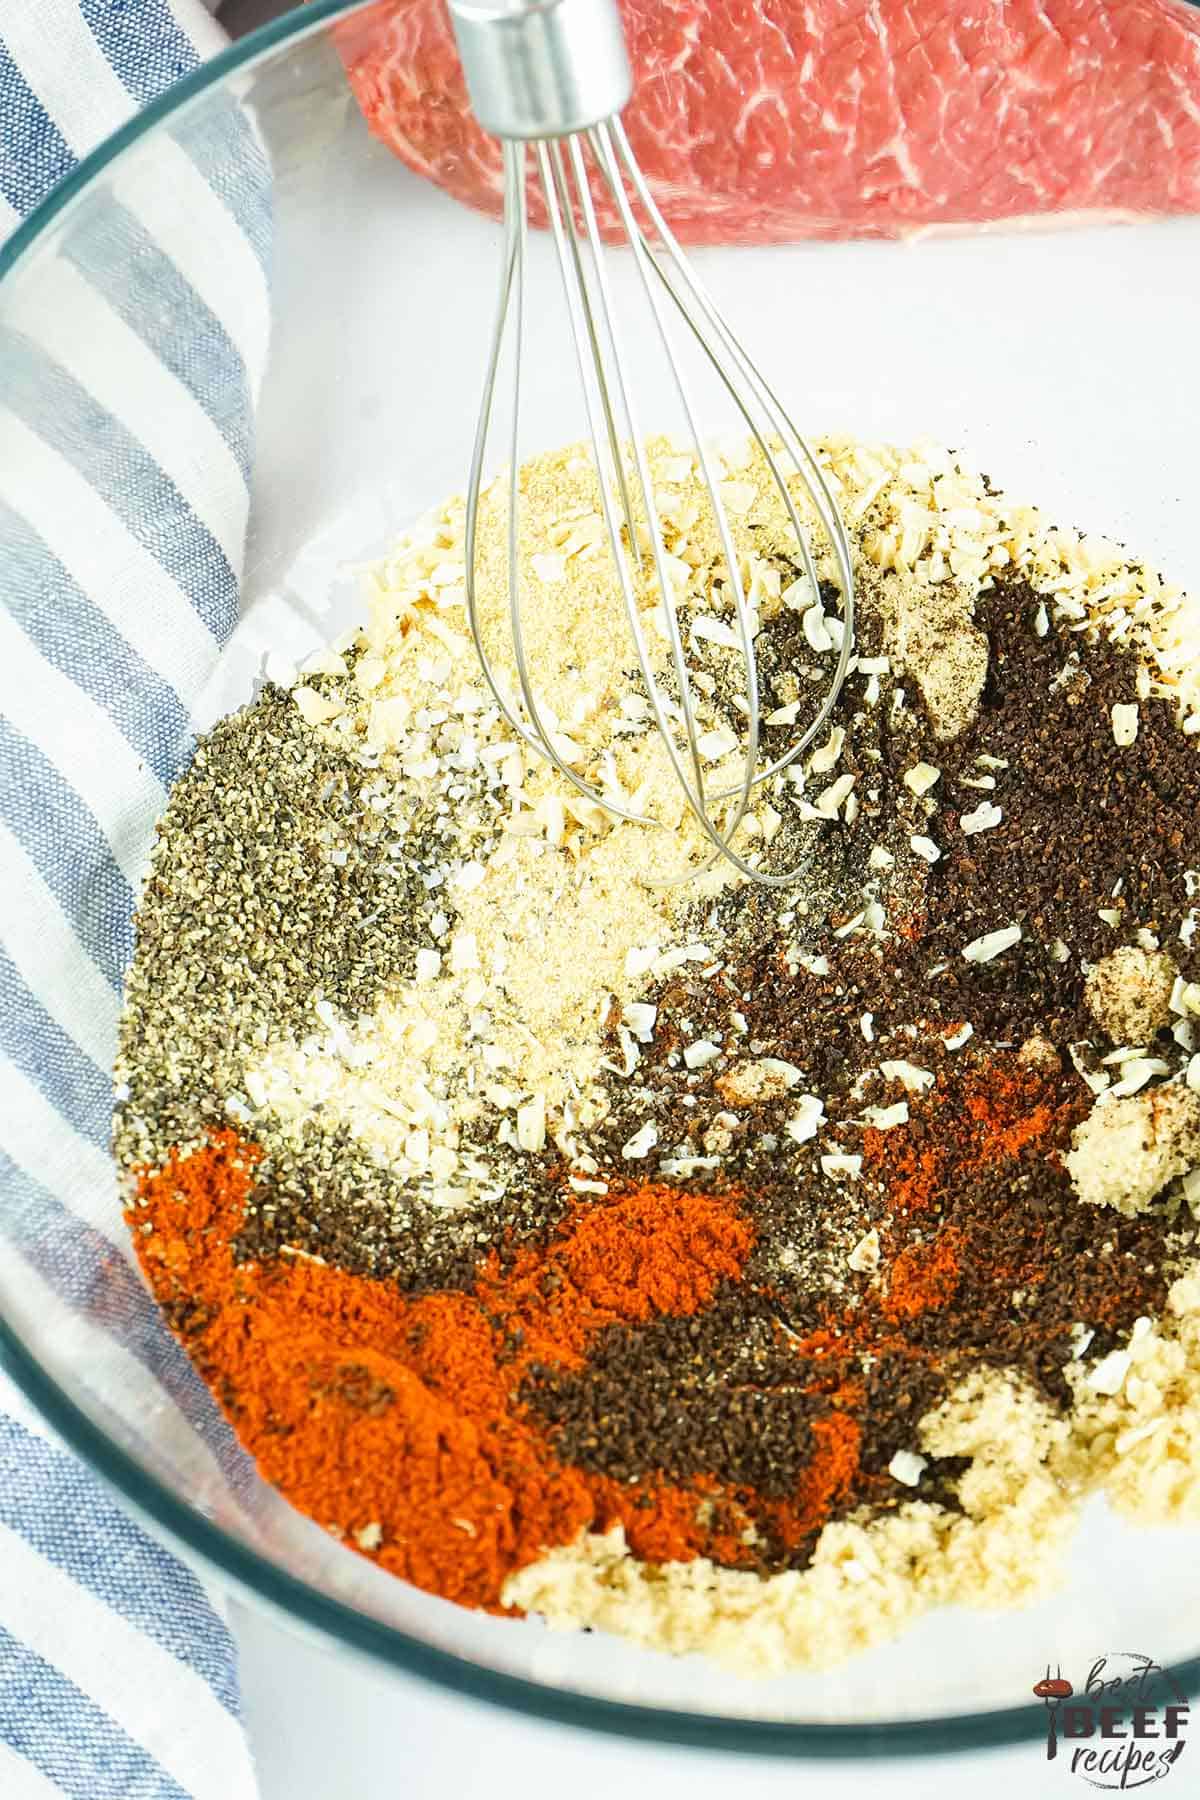 Coffee rub ingredients in a glass bowl with a whisk